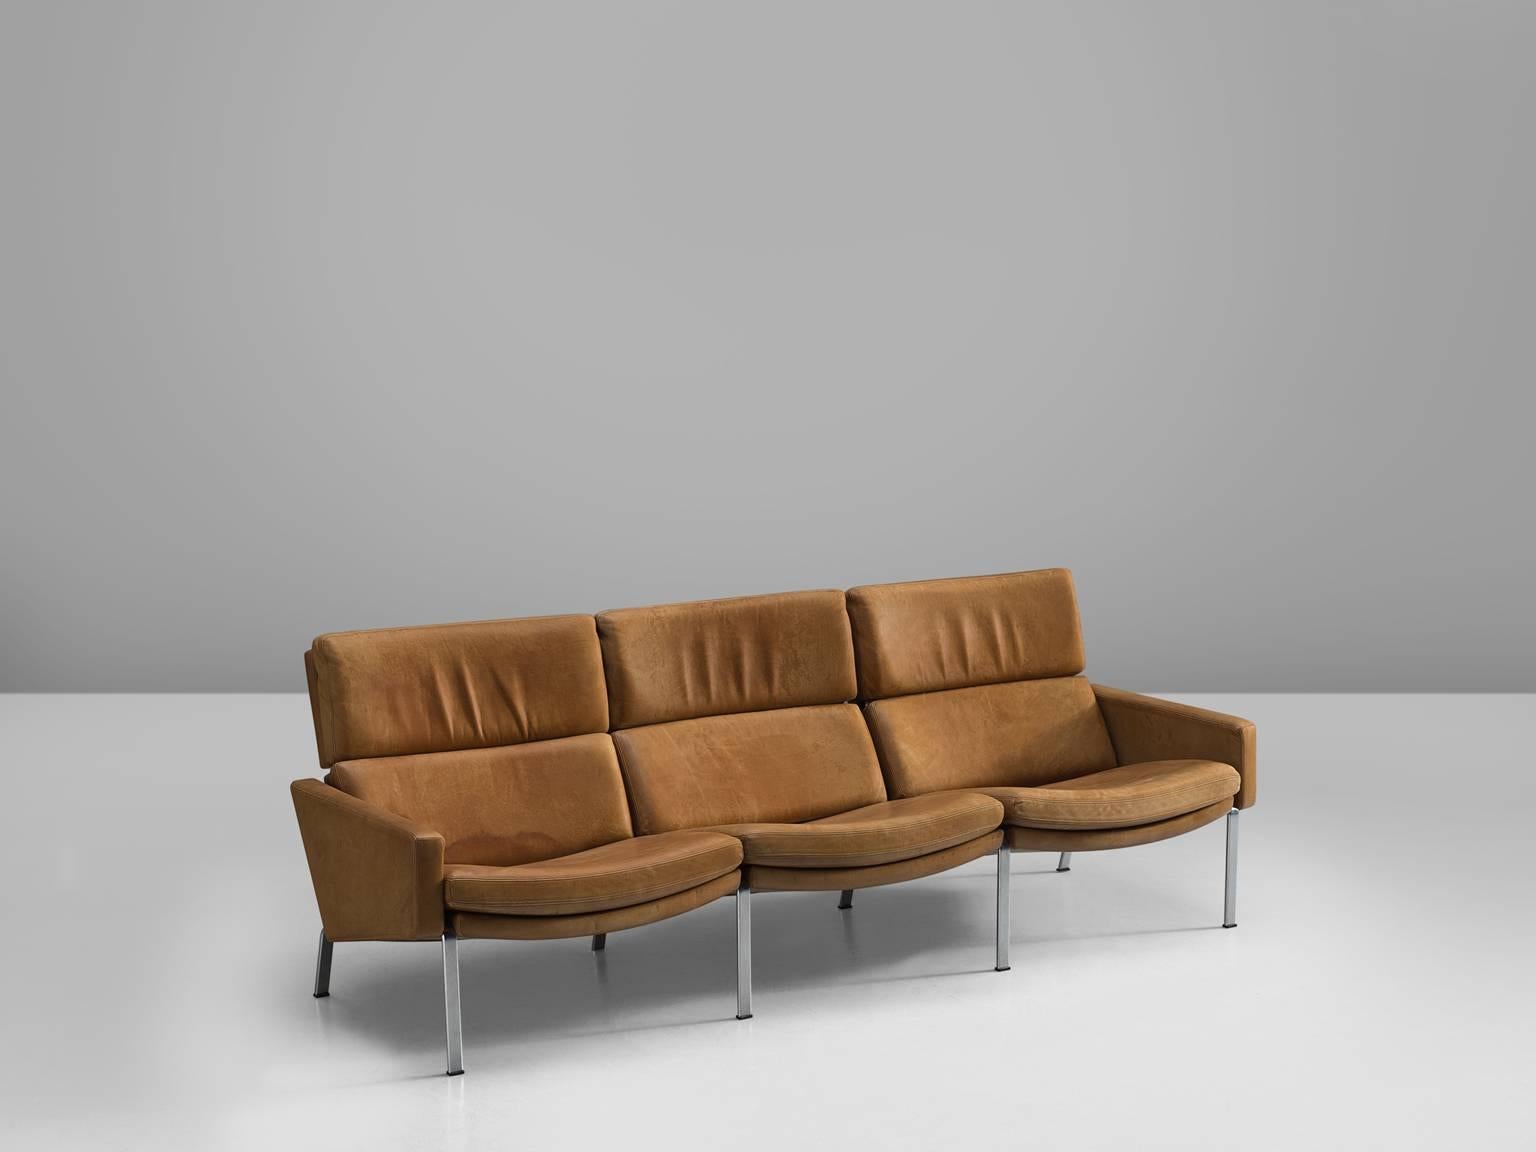 Jørgen Kastholm for Alfred Kill, three-seat sofa, leather and steel, 1970s.

This lovely cognac three-seat sofa with six steel legs is very comfortable. The soft patinated cognac leather cushions provide the back with excellent support. The sofa